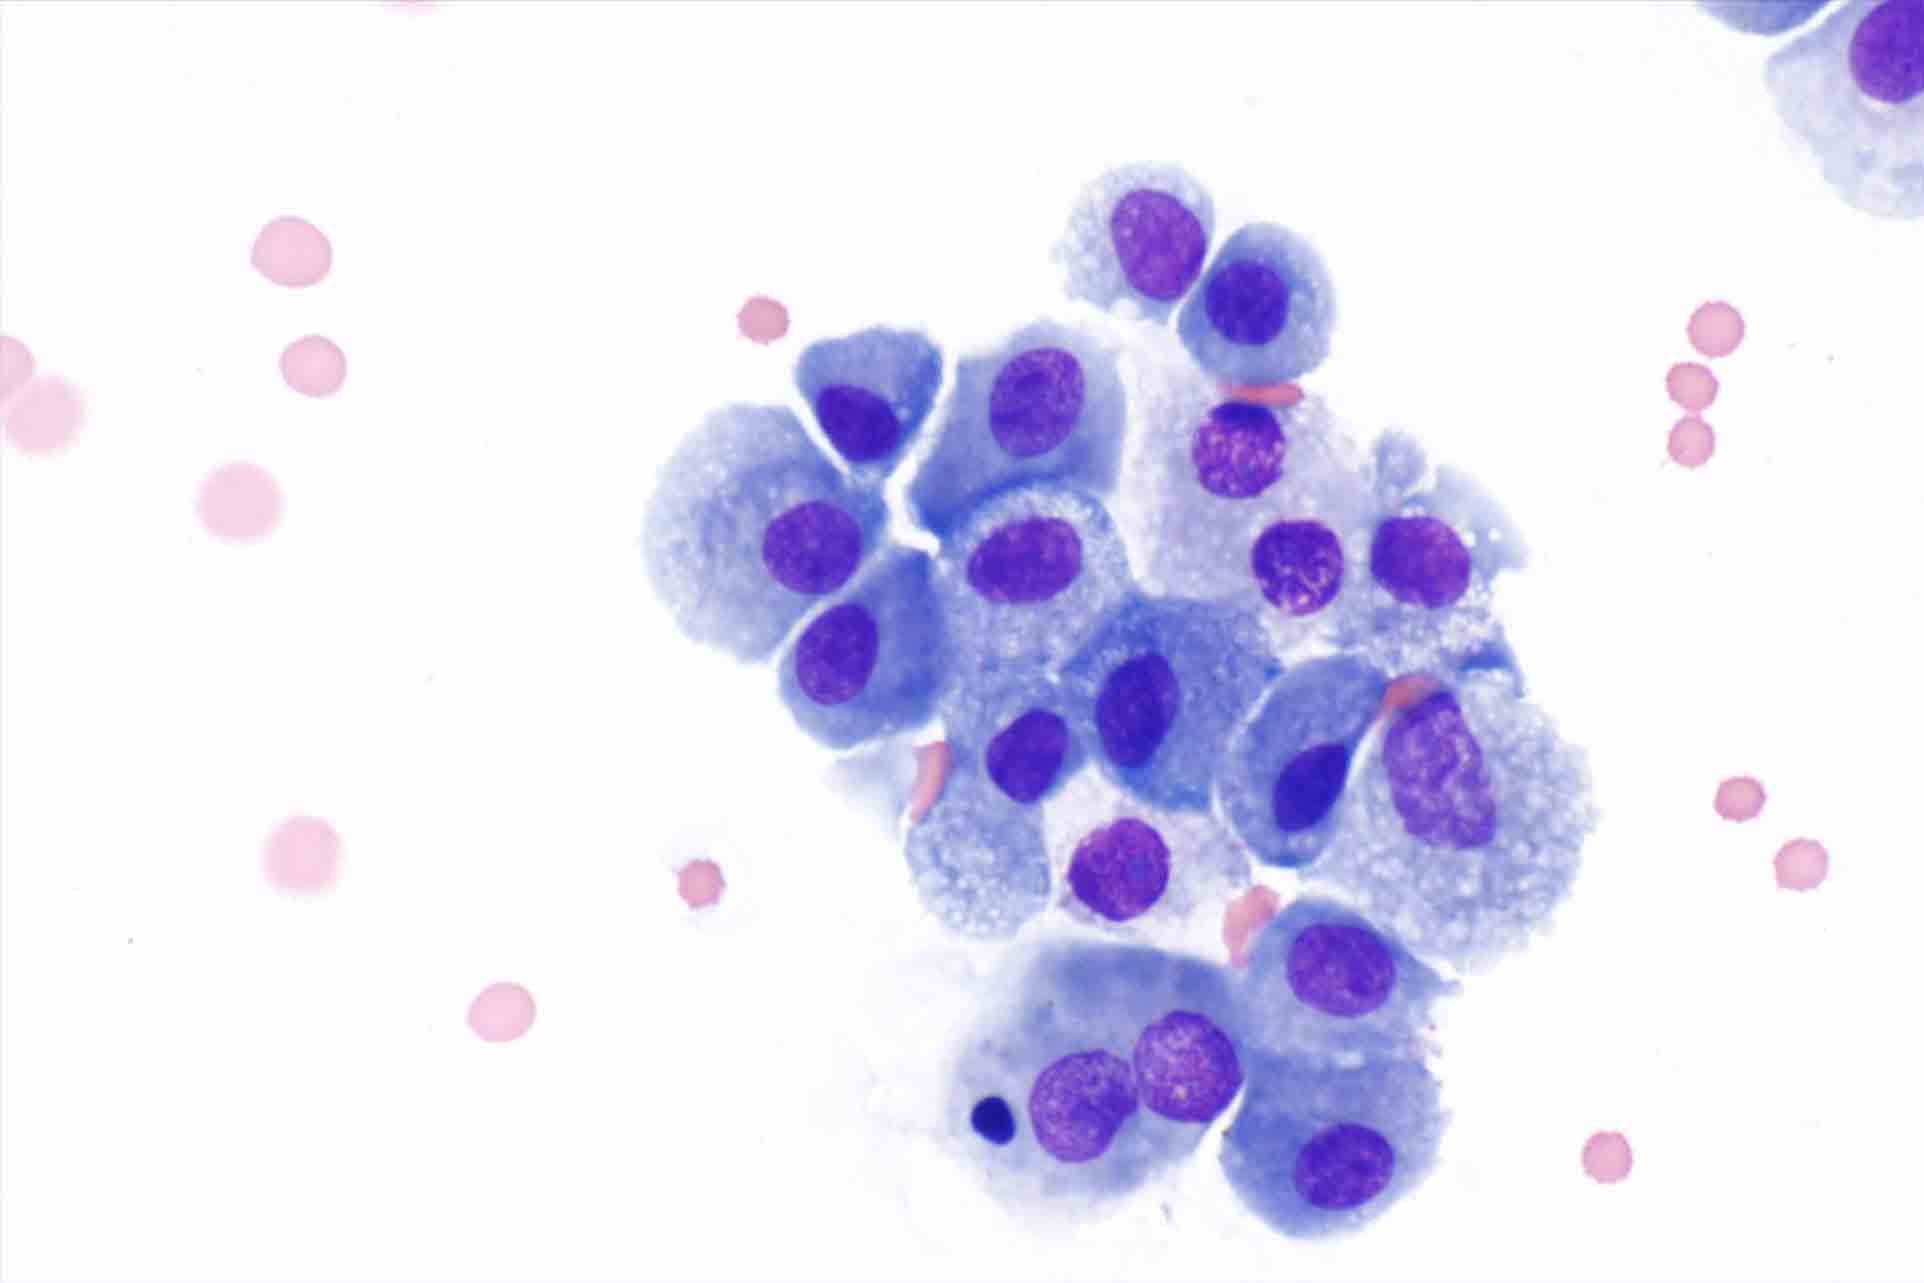 macrophages-wiki